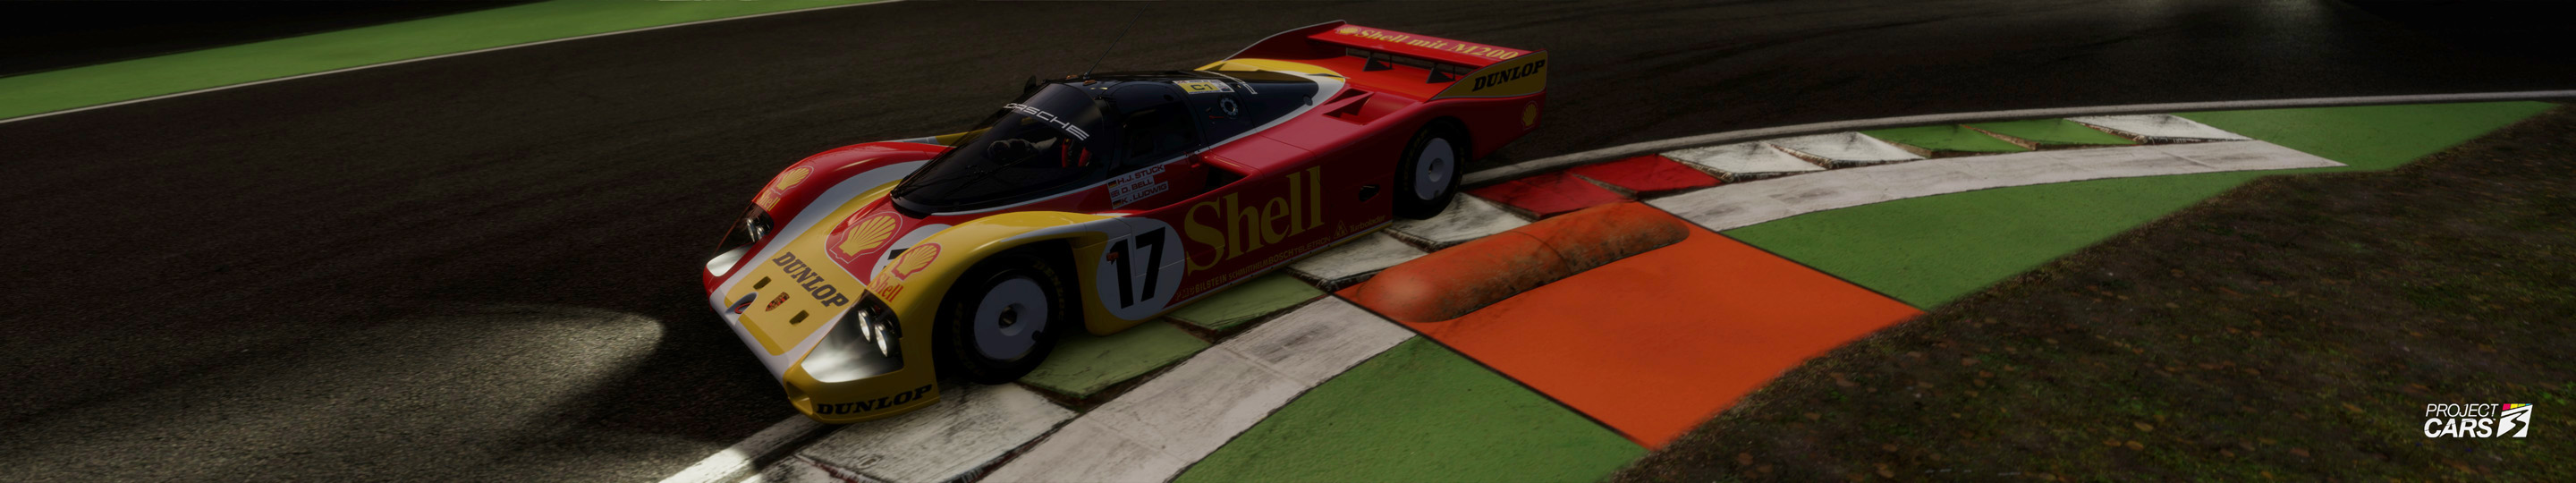 4 PROJECT CARS GROUP C at MONZA copy.jpg